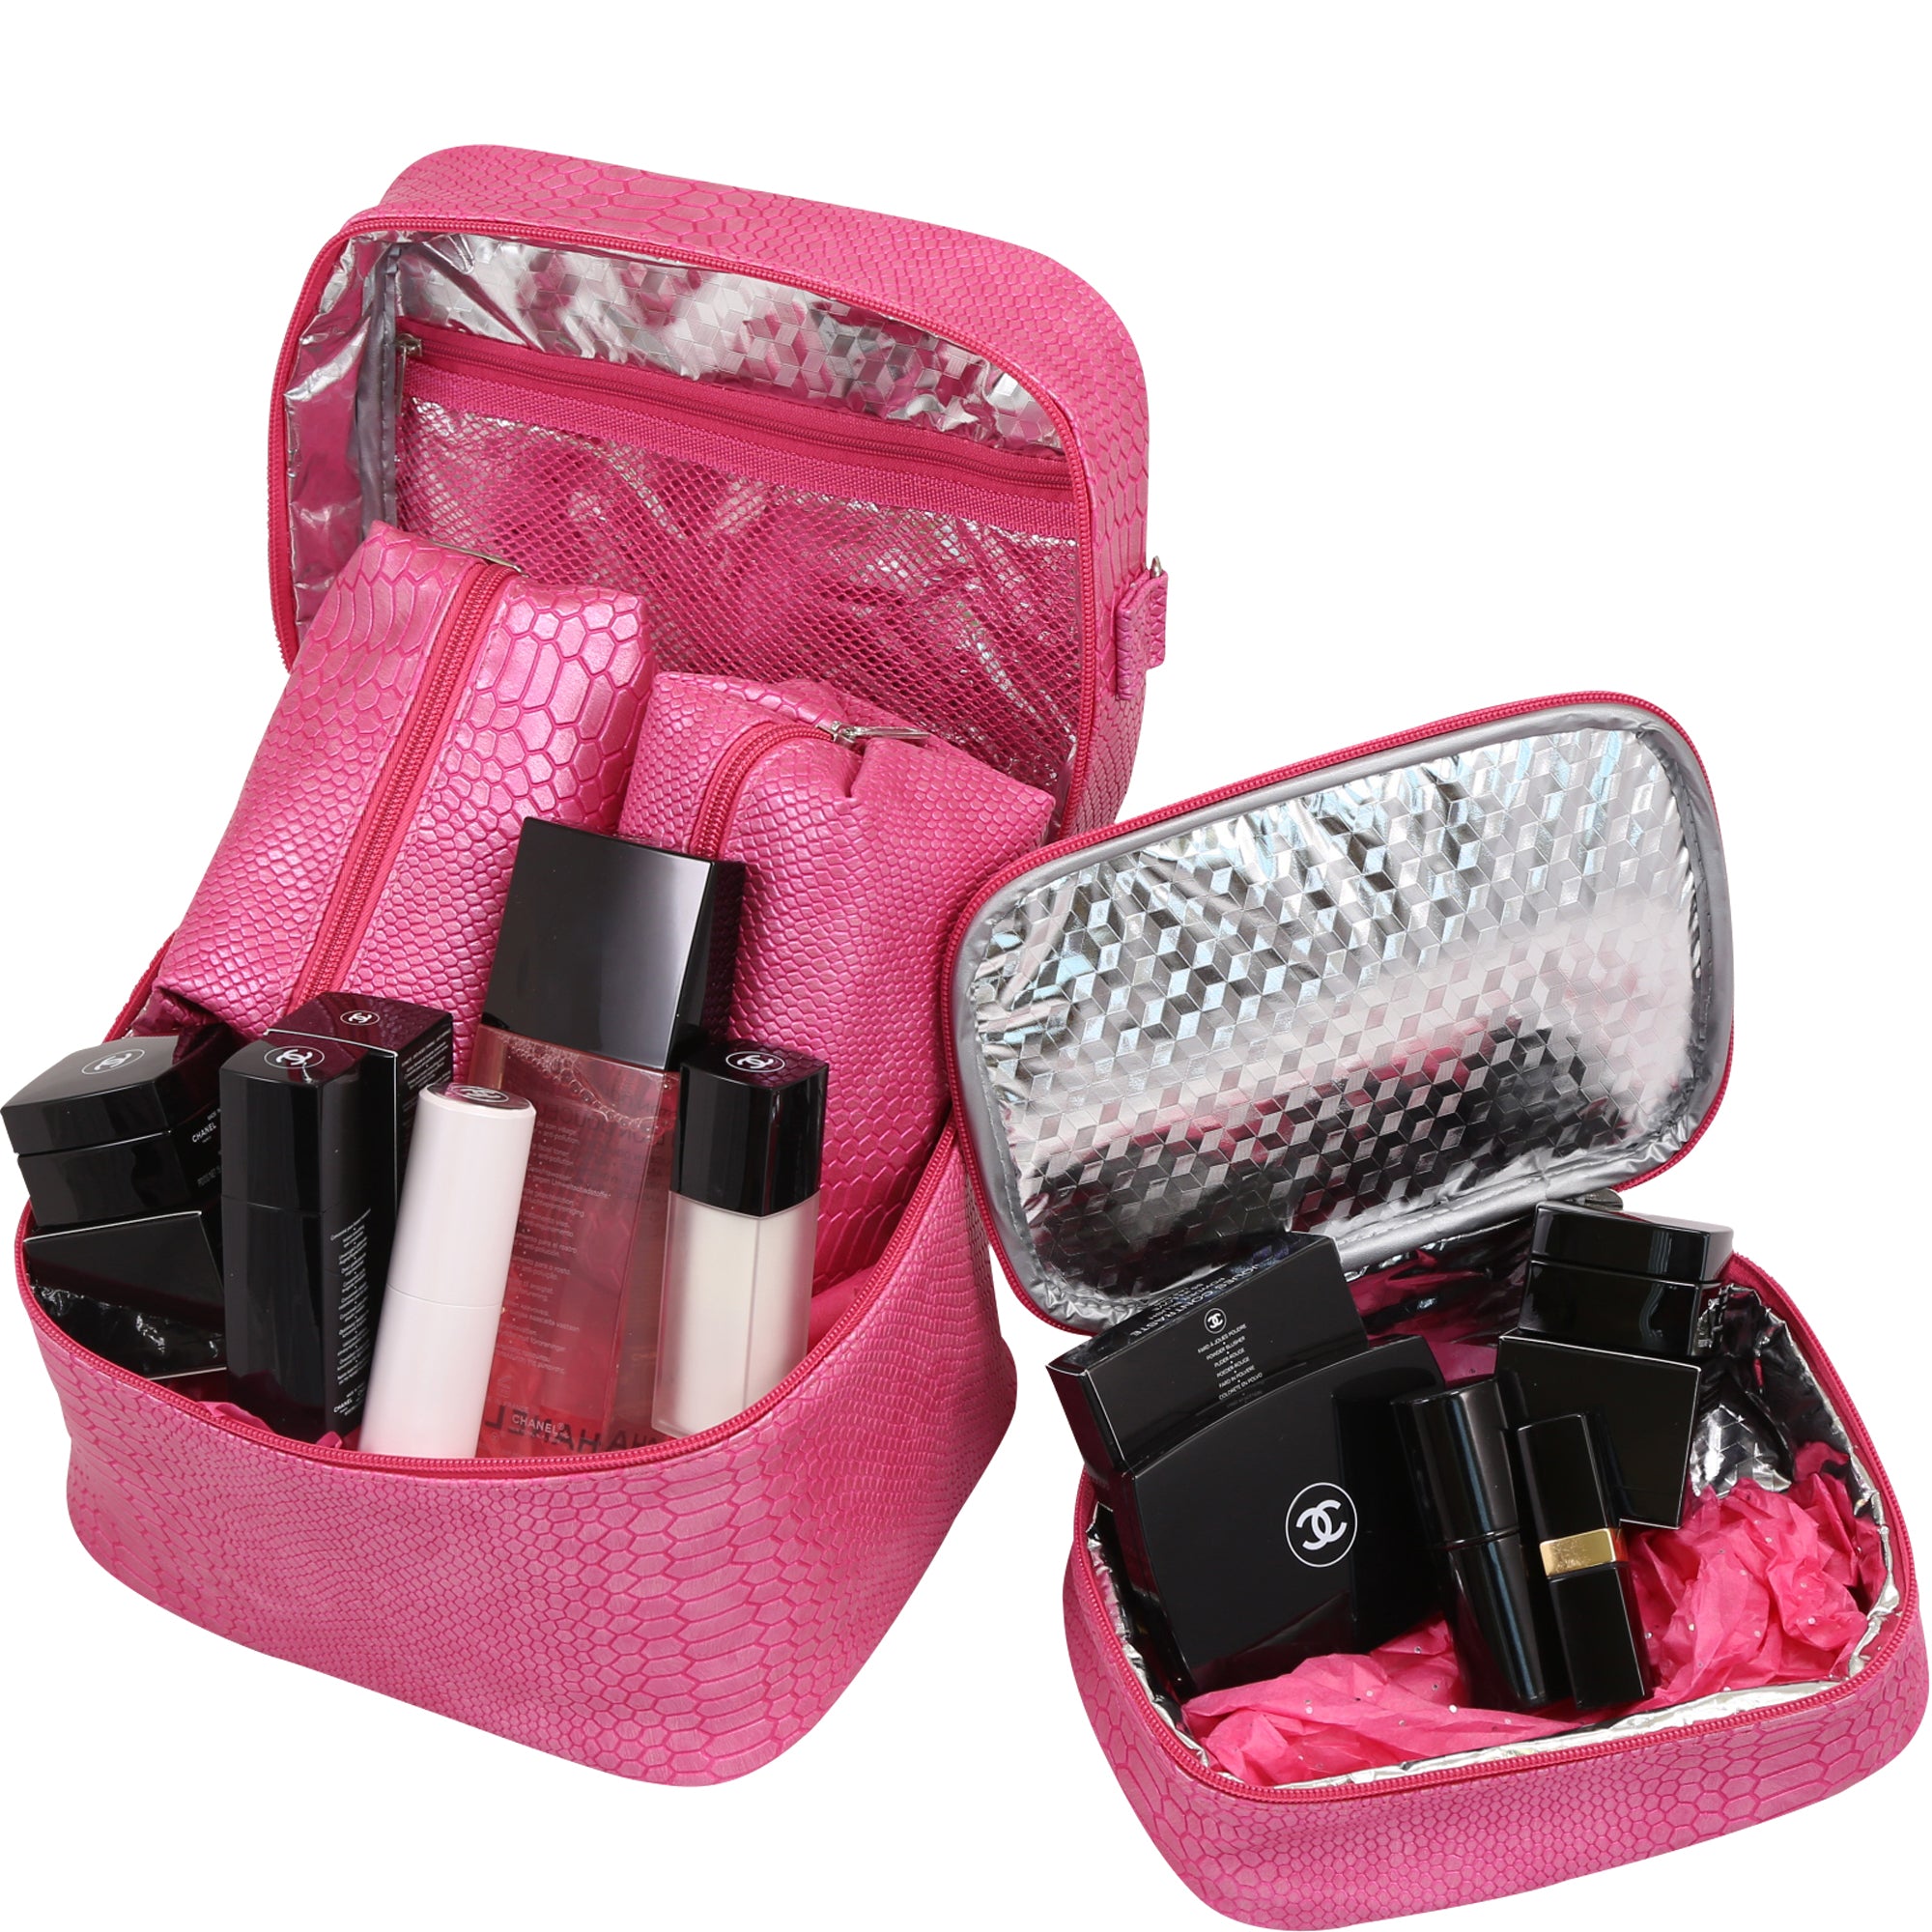 The essential makeup kit. The most important accessory for any…, by Vishal  Singh